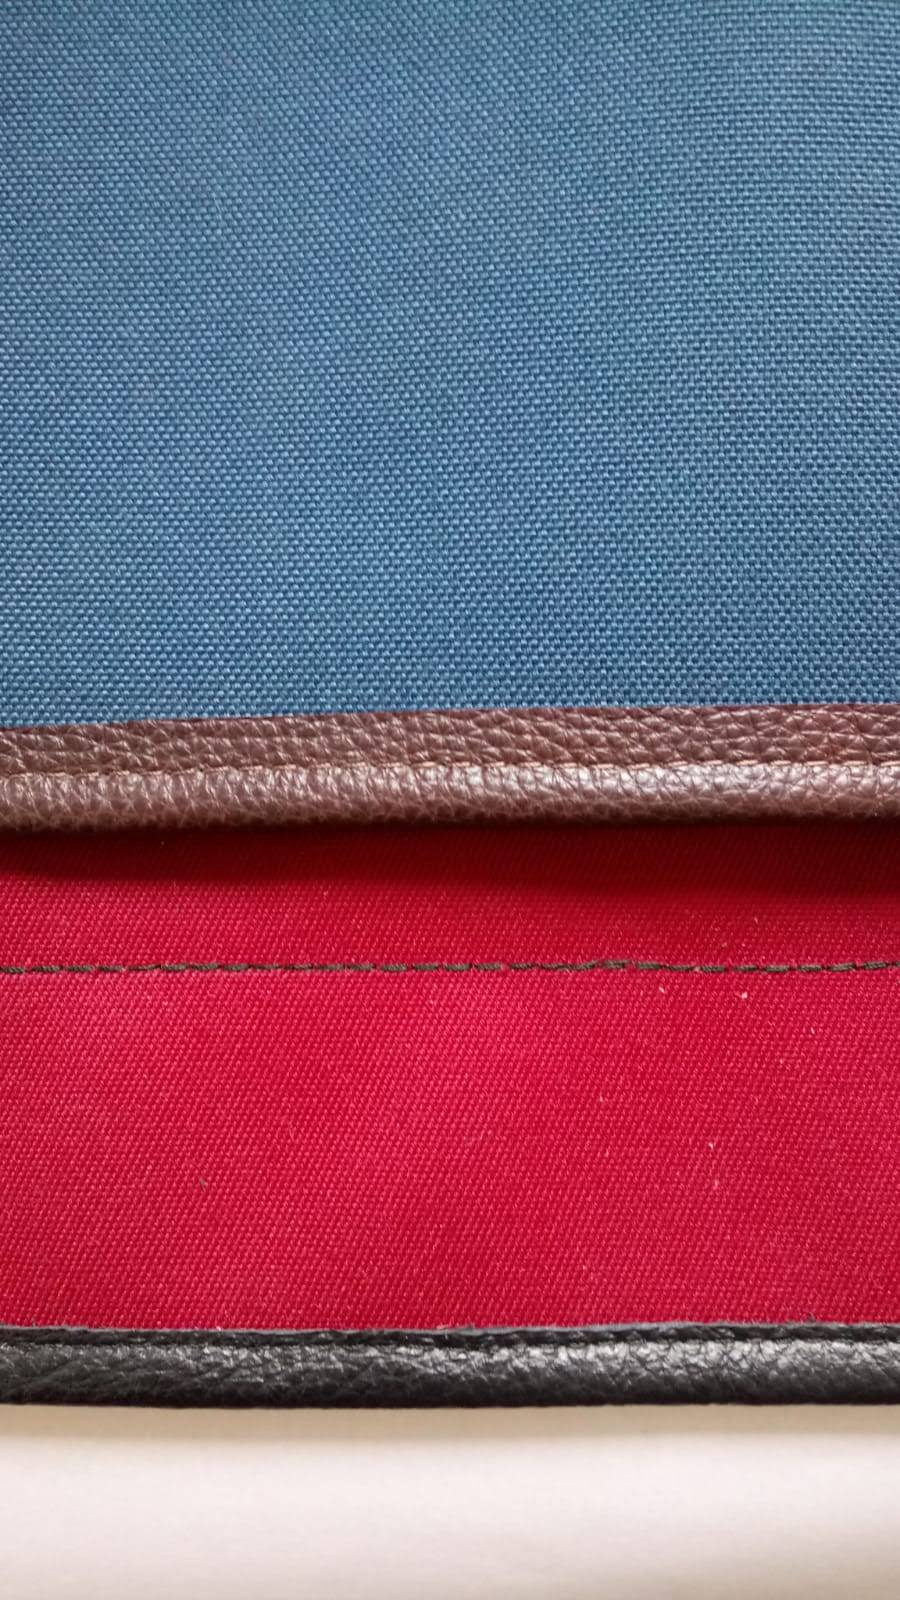 Add Leather Binding to Mohair Half-Tonneau Cover